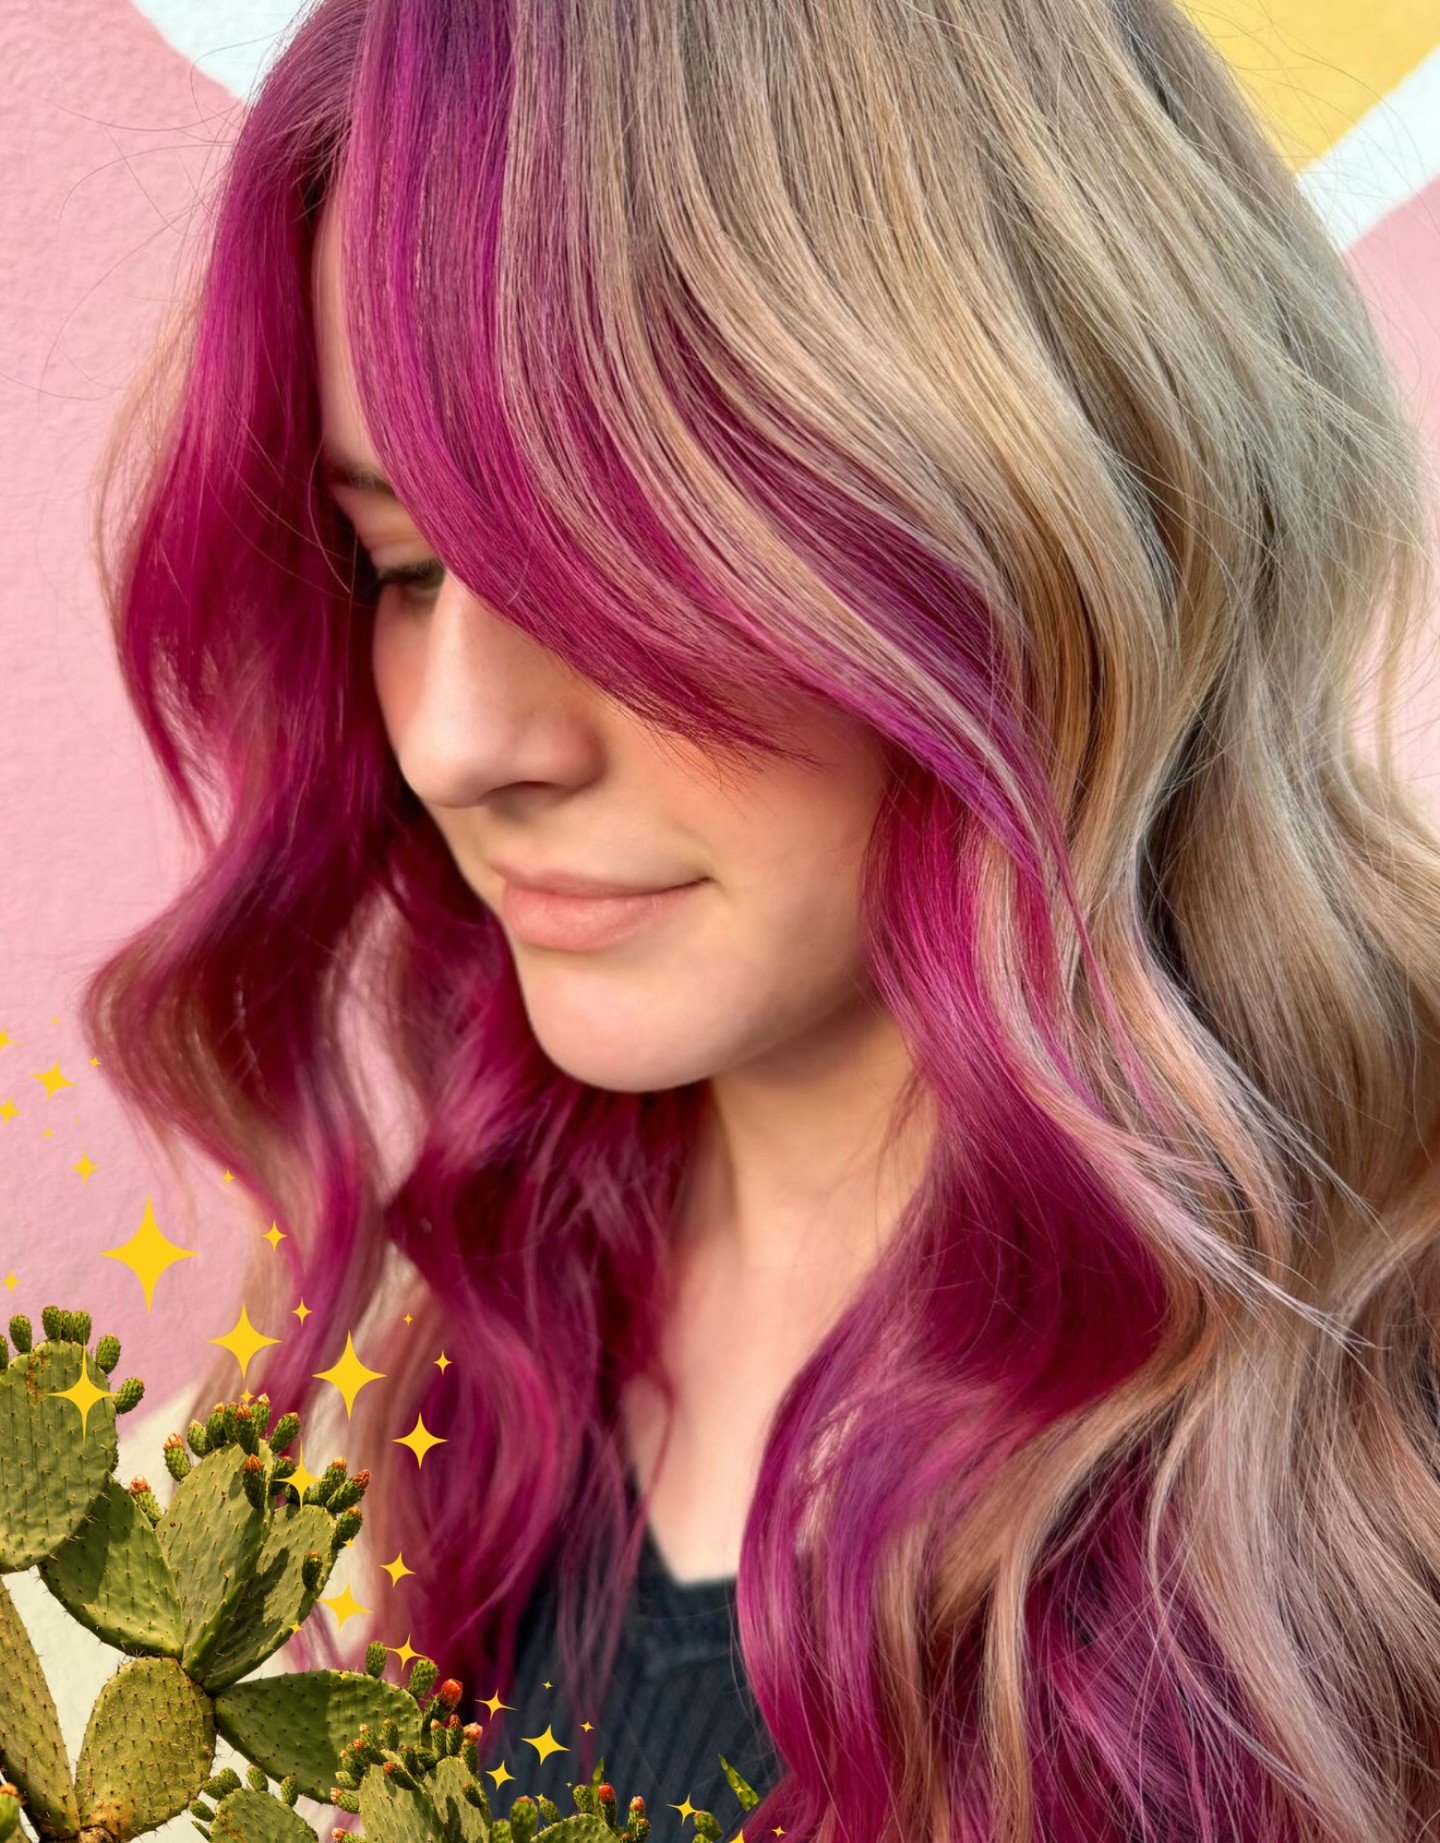 A hint of pink mingling with gorgeous blonde locks, creating a look that's pure artistry. Give @ariathelasthairbender a follow, she's freaking rad! Trust us 😉

*
*
*
*
*
#randco #randcocolor #randcolove #phoenixaz #phoenixazsalon #swoonsalon